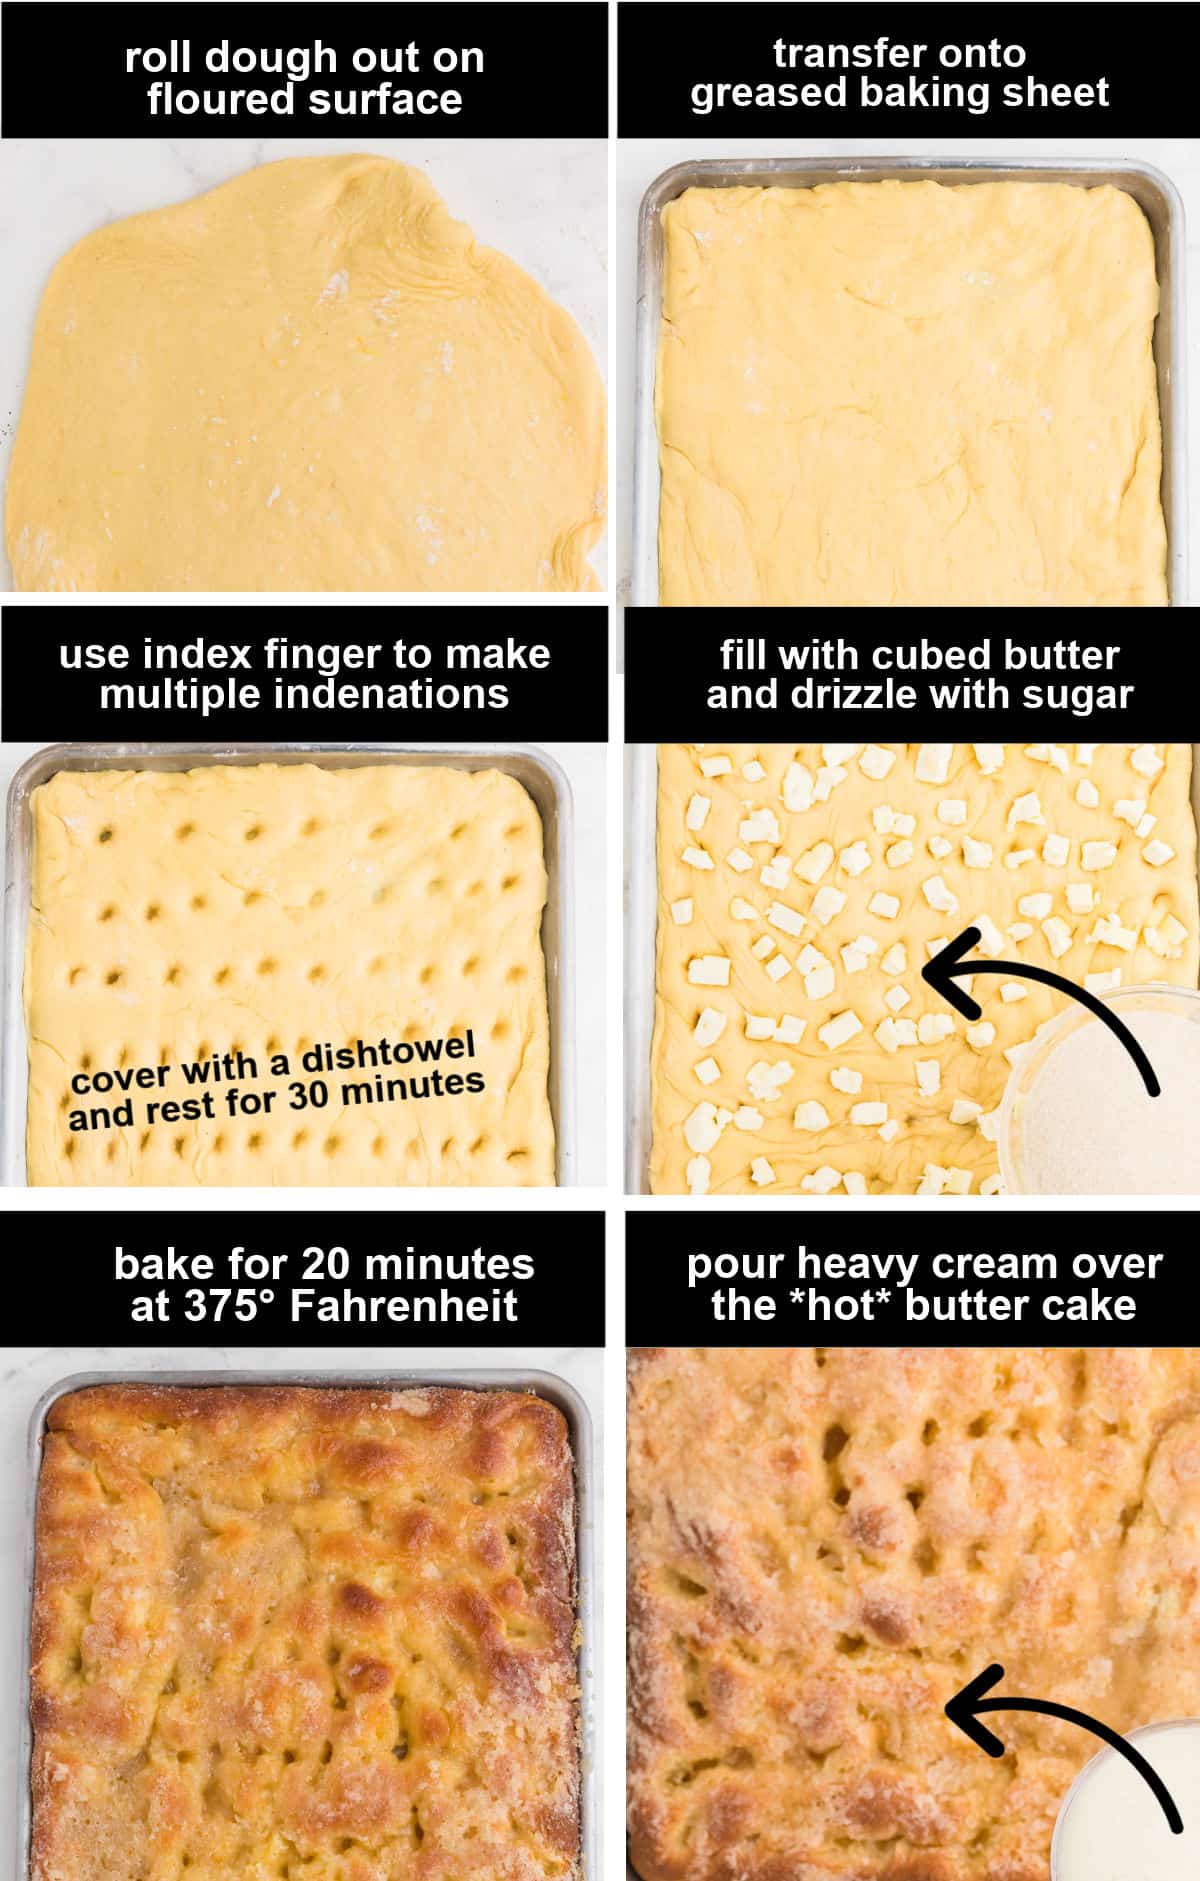 collage of images showing the steps how to take the prepare the dough for oven and what to do after baking